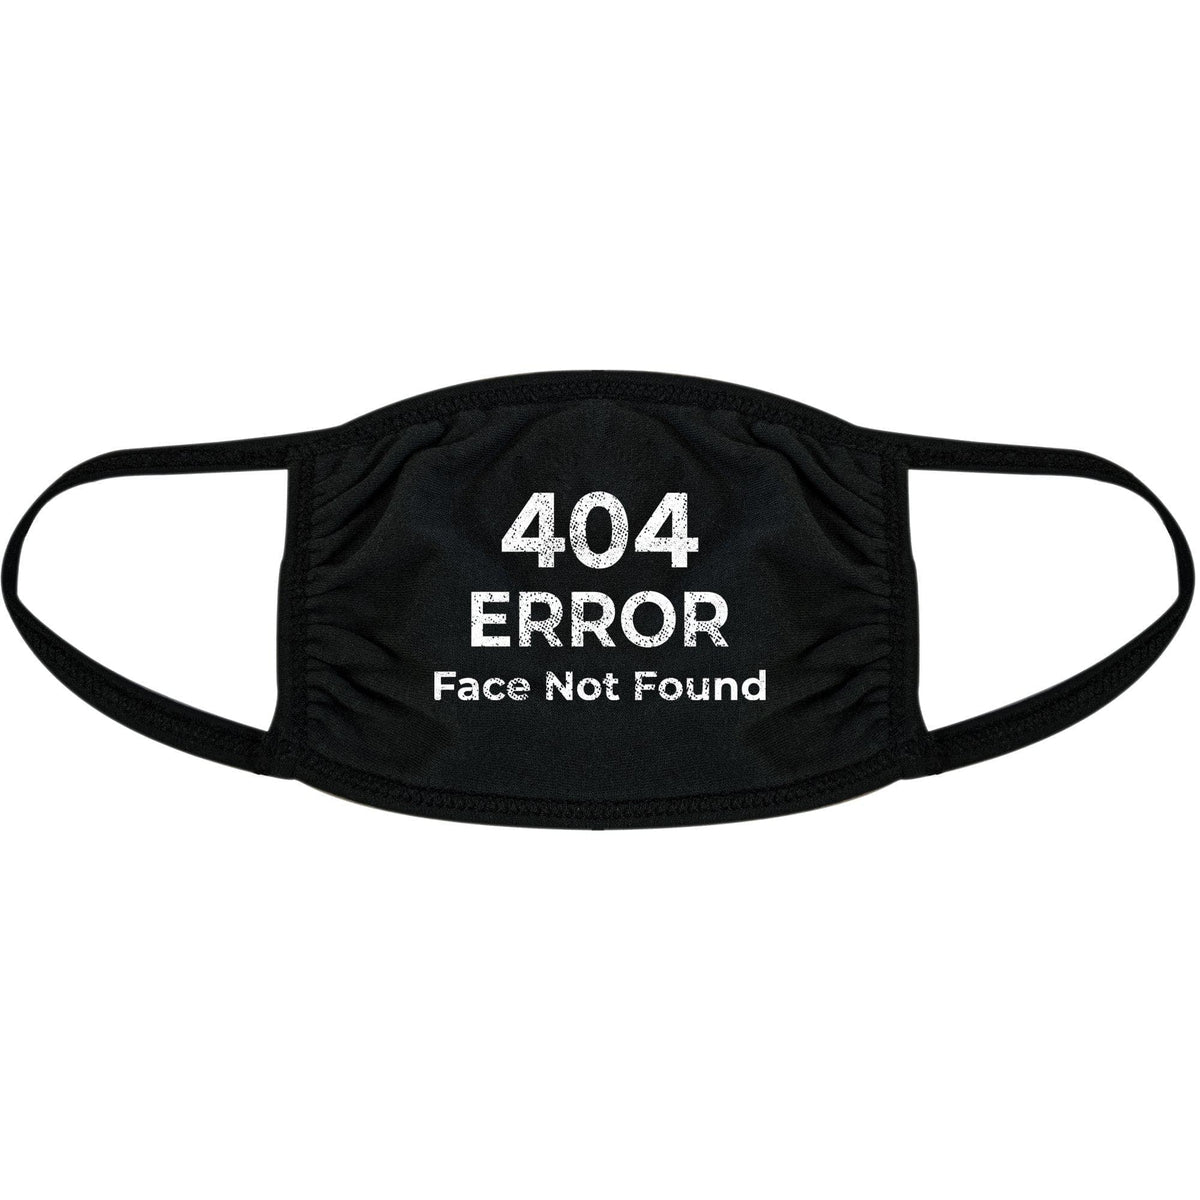 404 Error Face Not Found Face Mask Mask - Crazy Dog T-Shirts